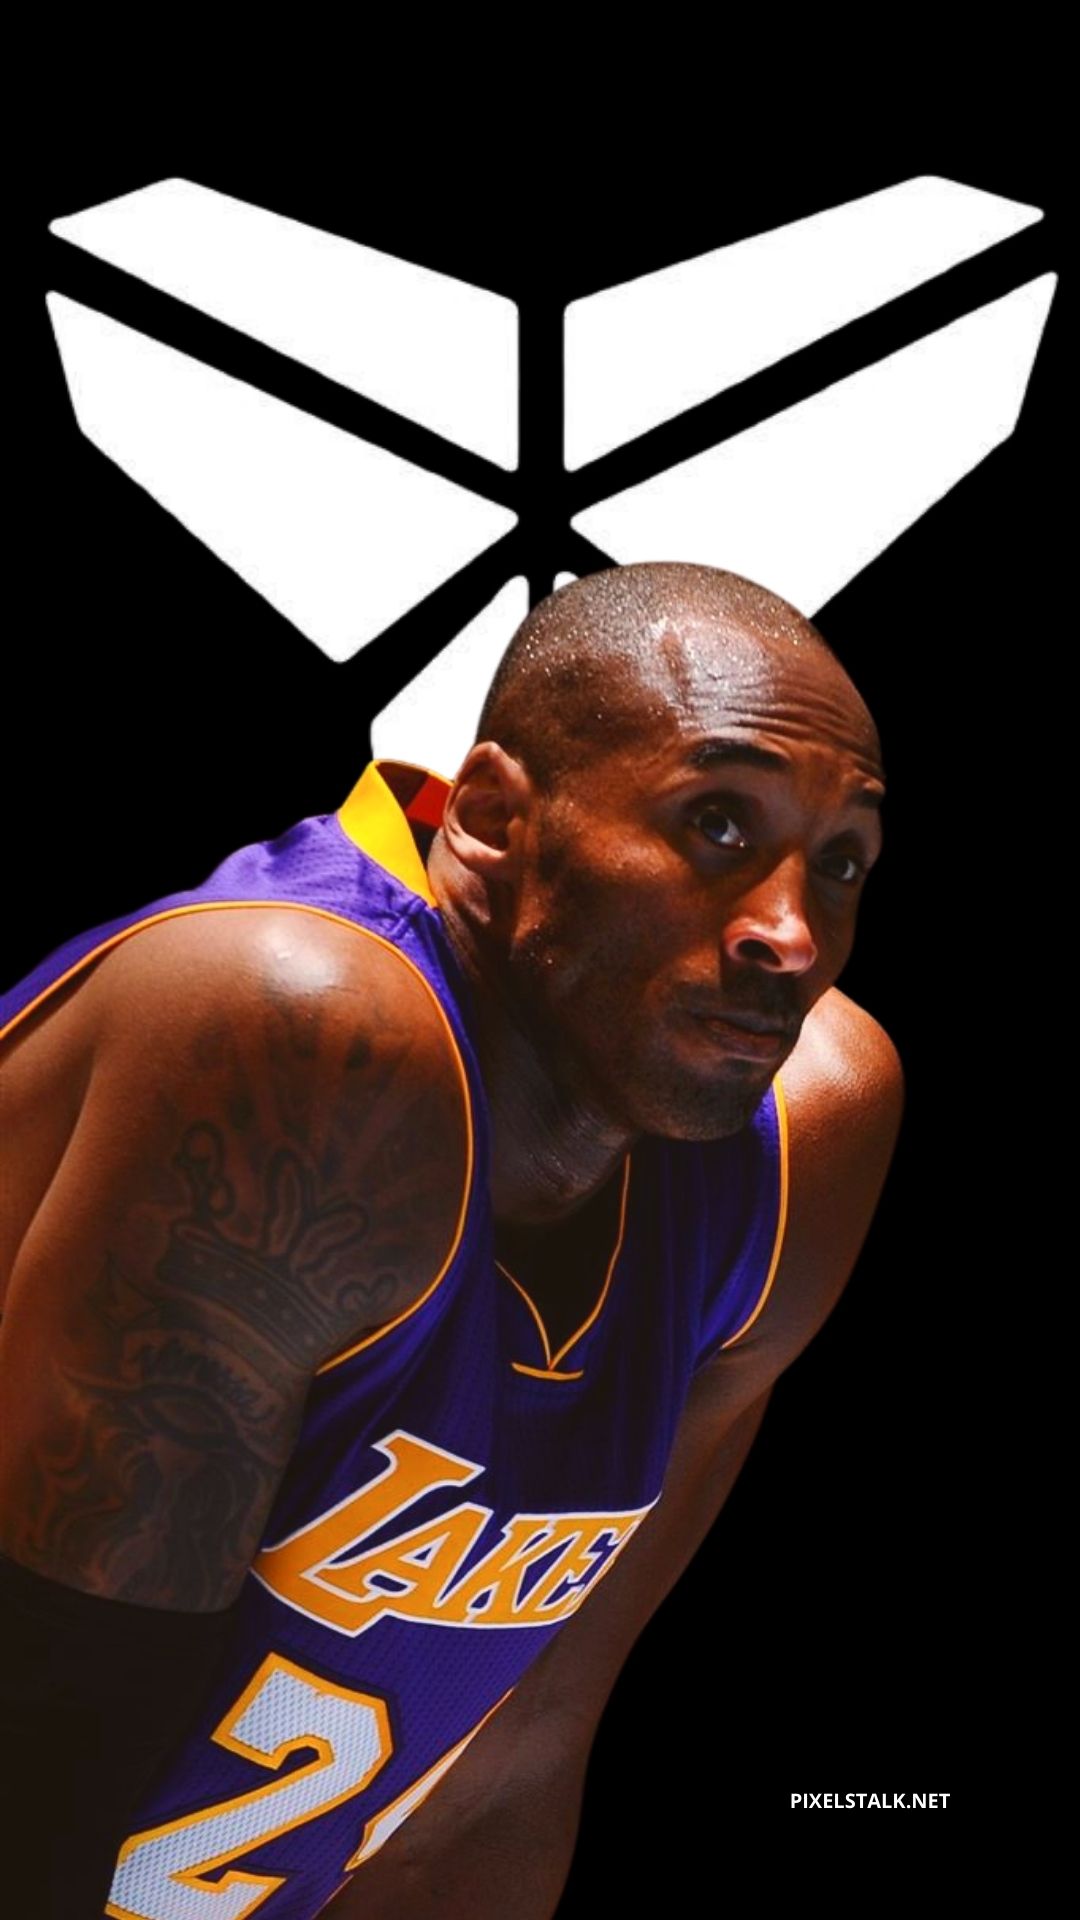 Kobe Bryant wallpaper for iPhone with high-resolution 1080x1920 pixel. You can use this wallpaper for your iPhone 5, 6, 7, 8, X, XS, XR backgrounds, Mobile Screensaver, or iPad Lock Screen - Kobe Bryant